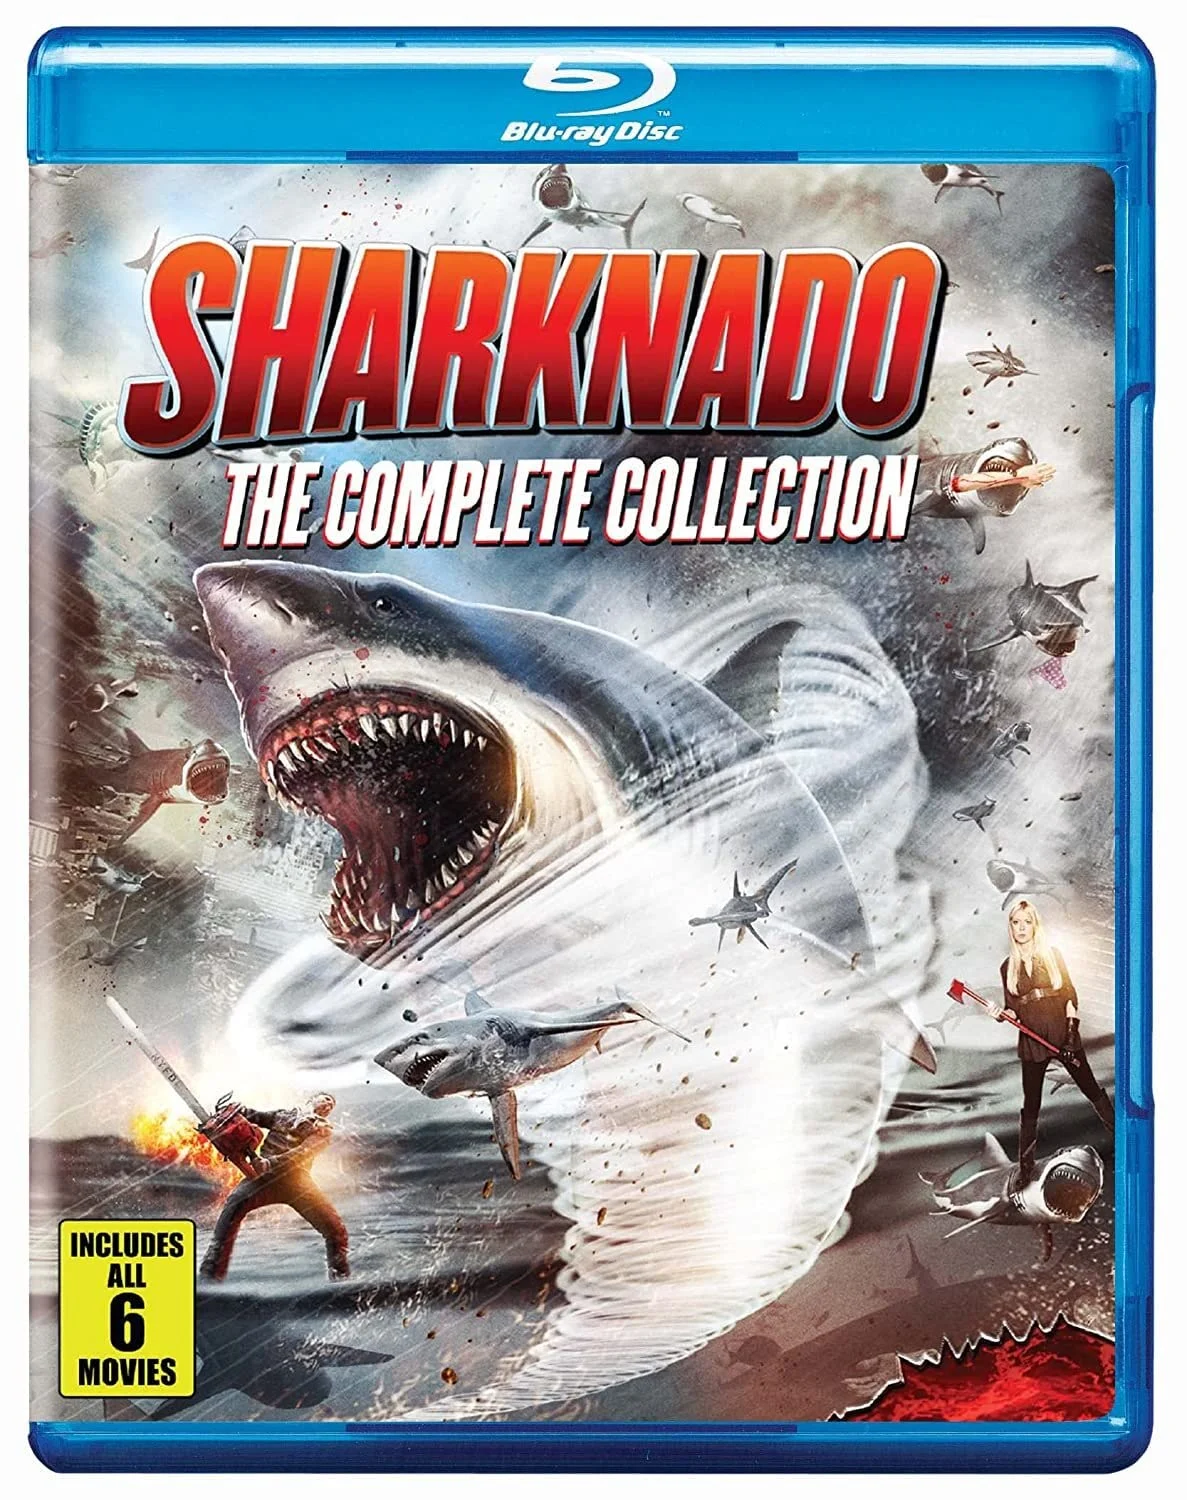 Sharknado: The Complete Collection (Blu-ray) on MovieShack